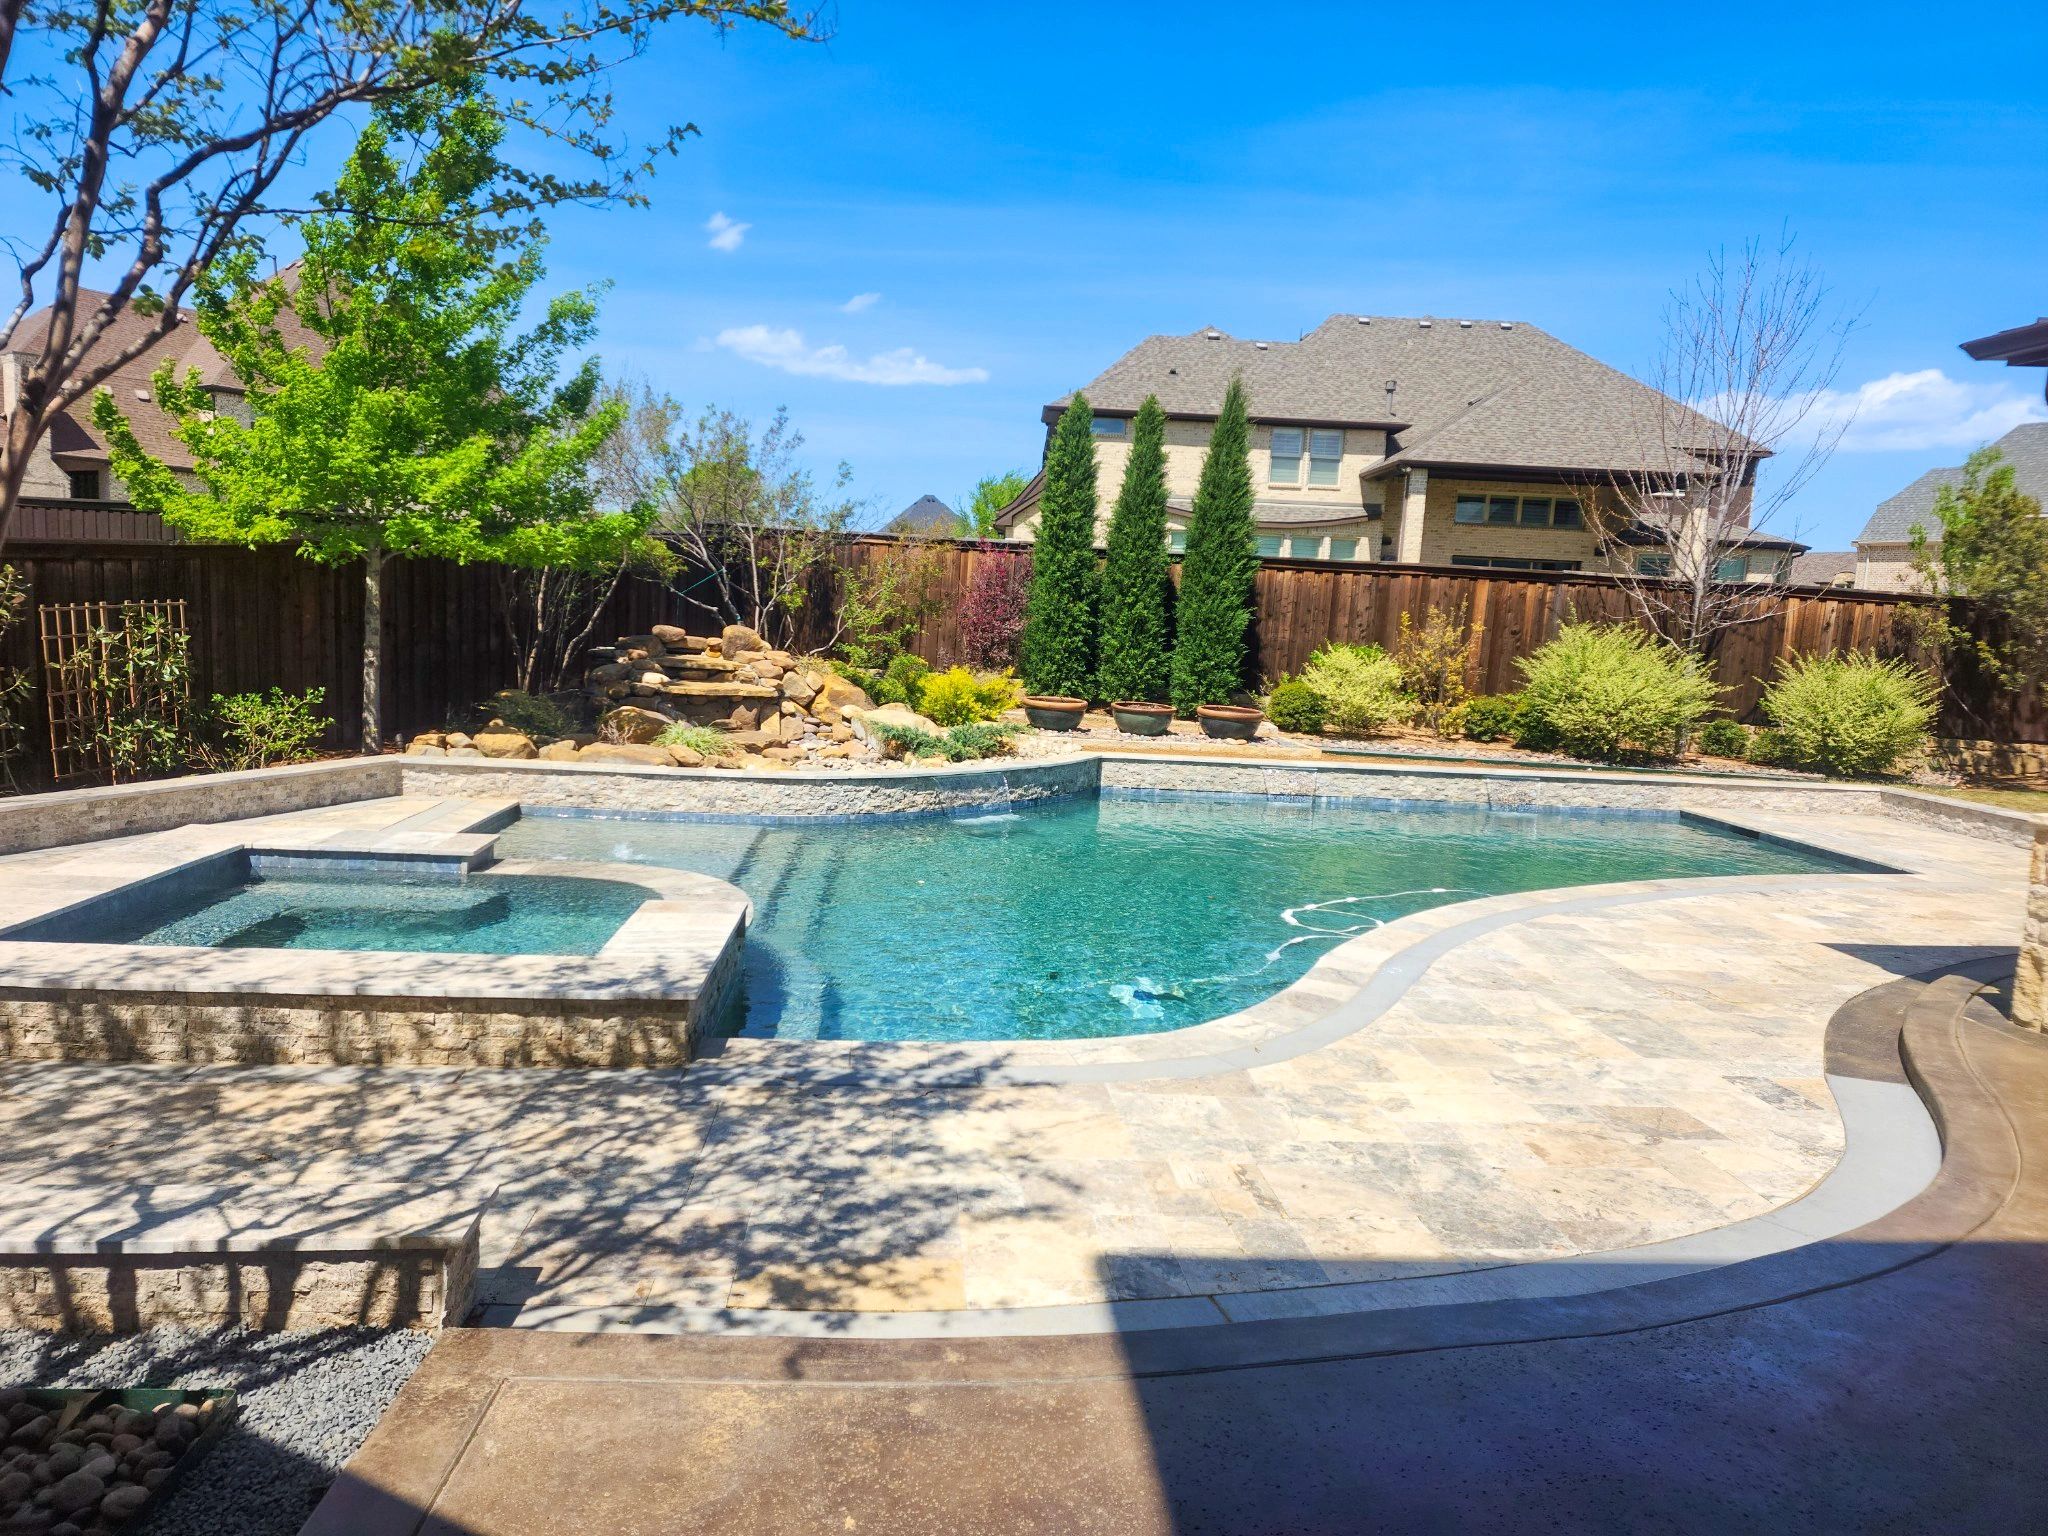 dallas richardson build a new pool 7 Dallas Pool Builders: Transforming Dreams into Reality with Integrity Pools